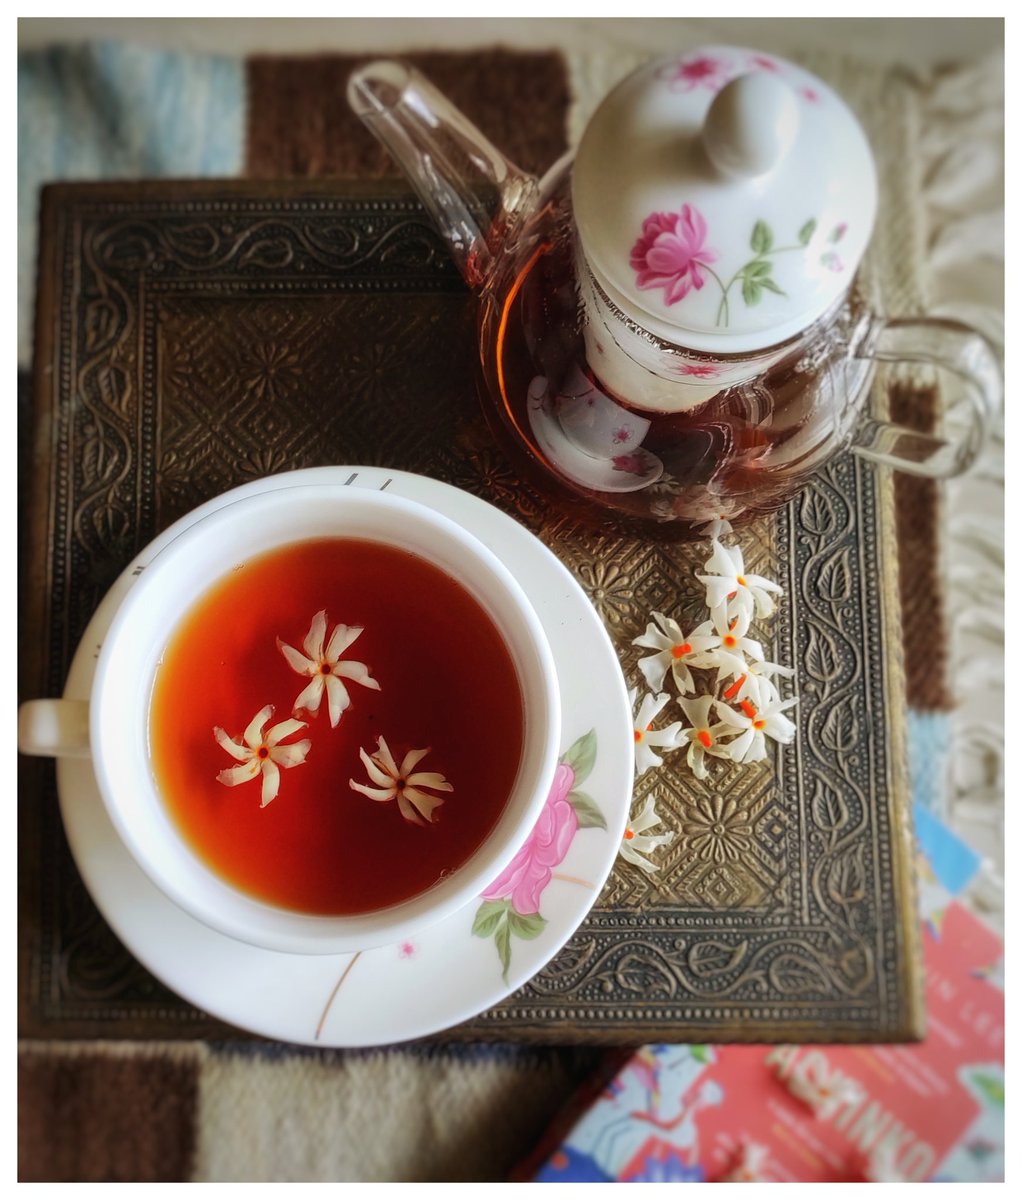 Finally the muggy week has given way for some soothing rains 🌧️❤️

Thought with my excess supply of Parijat flowers, I'll brew myself a nice tulsi-parijat tea (thanks for the link ThinkersPad ) in my new acquisition,to enjoy the pitter patter ☕
#herbal #kettlelove #tealove #rain